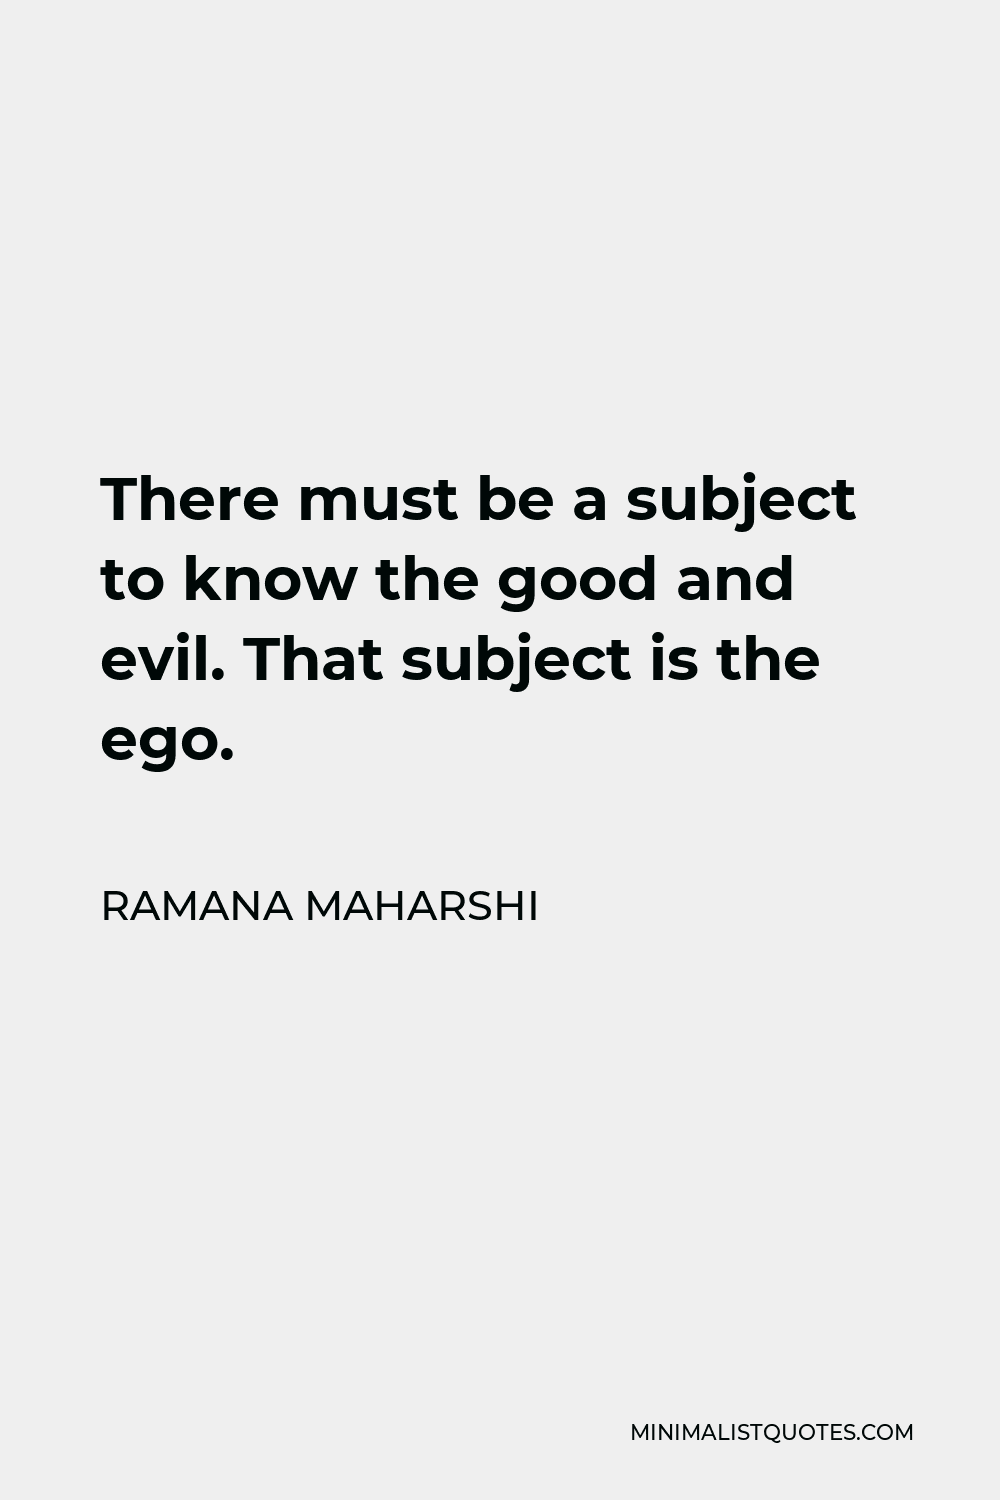 Ramana Maharshi Quote - There must be a subject to know the good and evil. That subject is the ego.